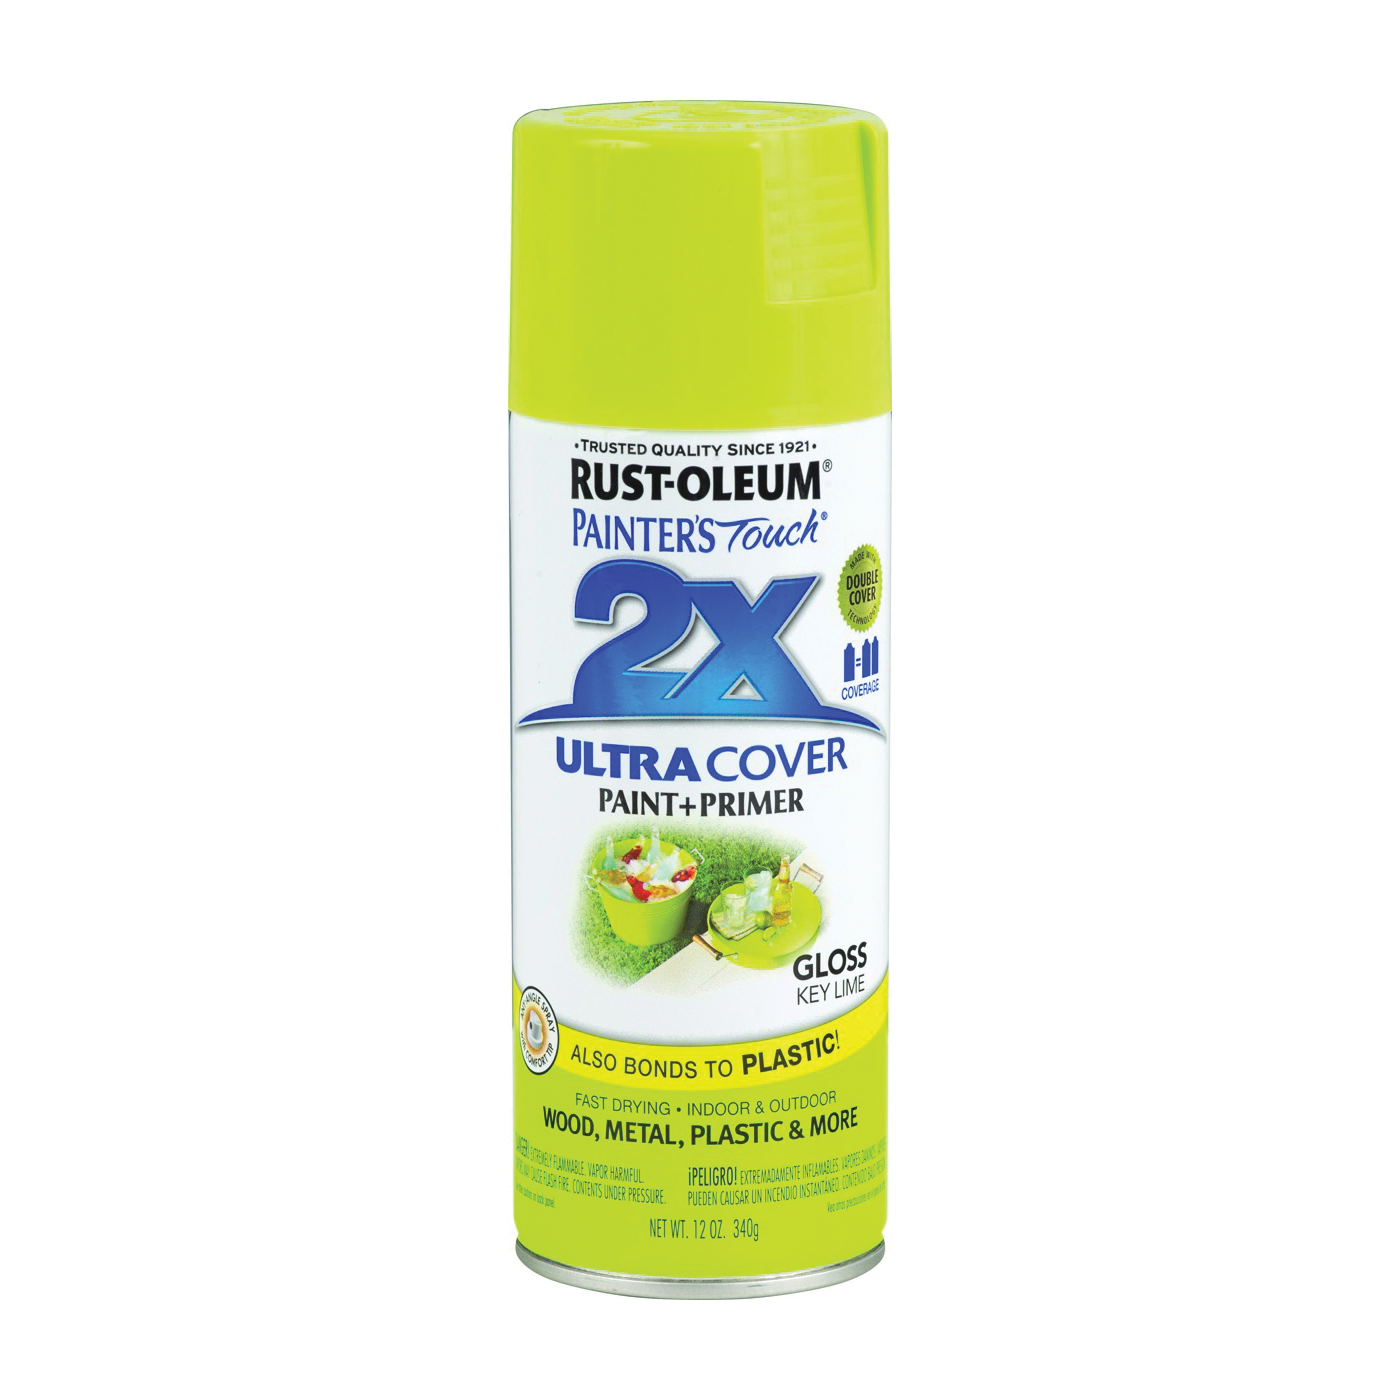 2X Ultra Cover 249104 Spray Paint, Gloss, Key Lime, 12 oz, Can - 1